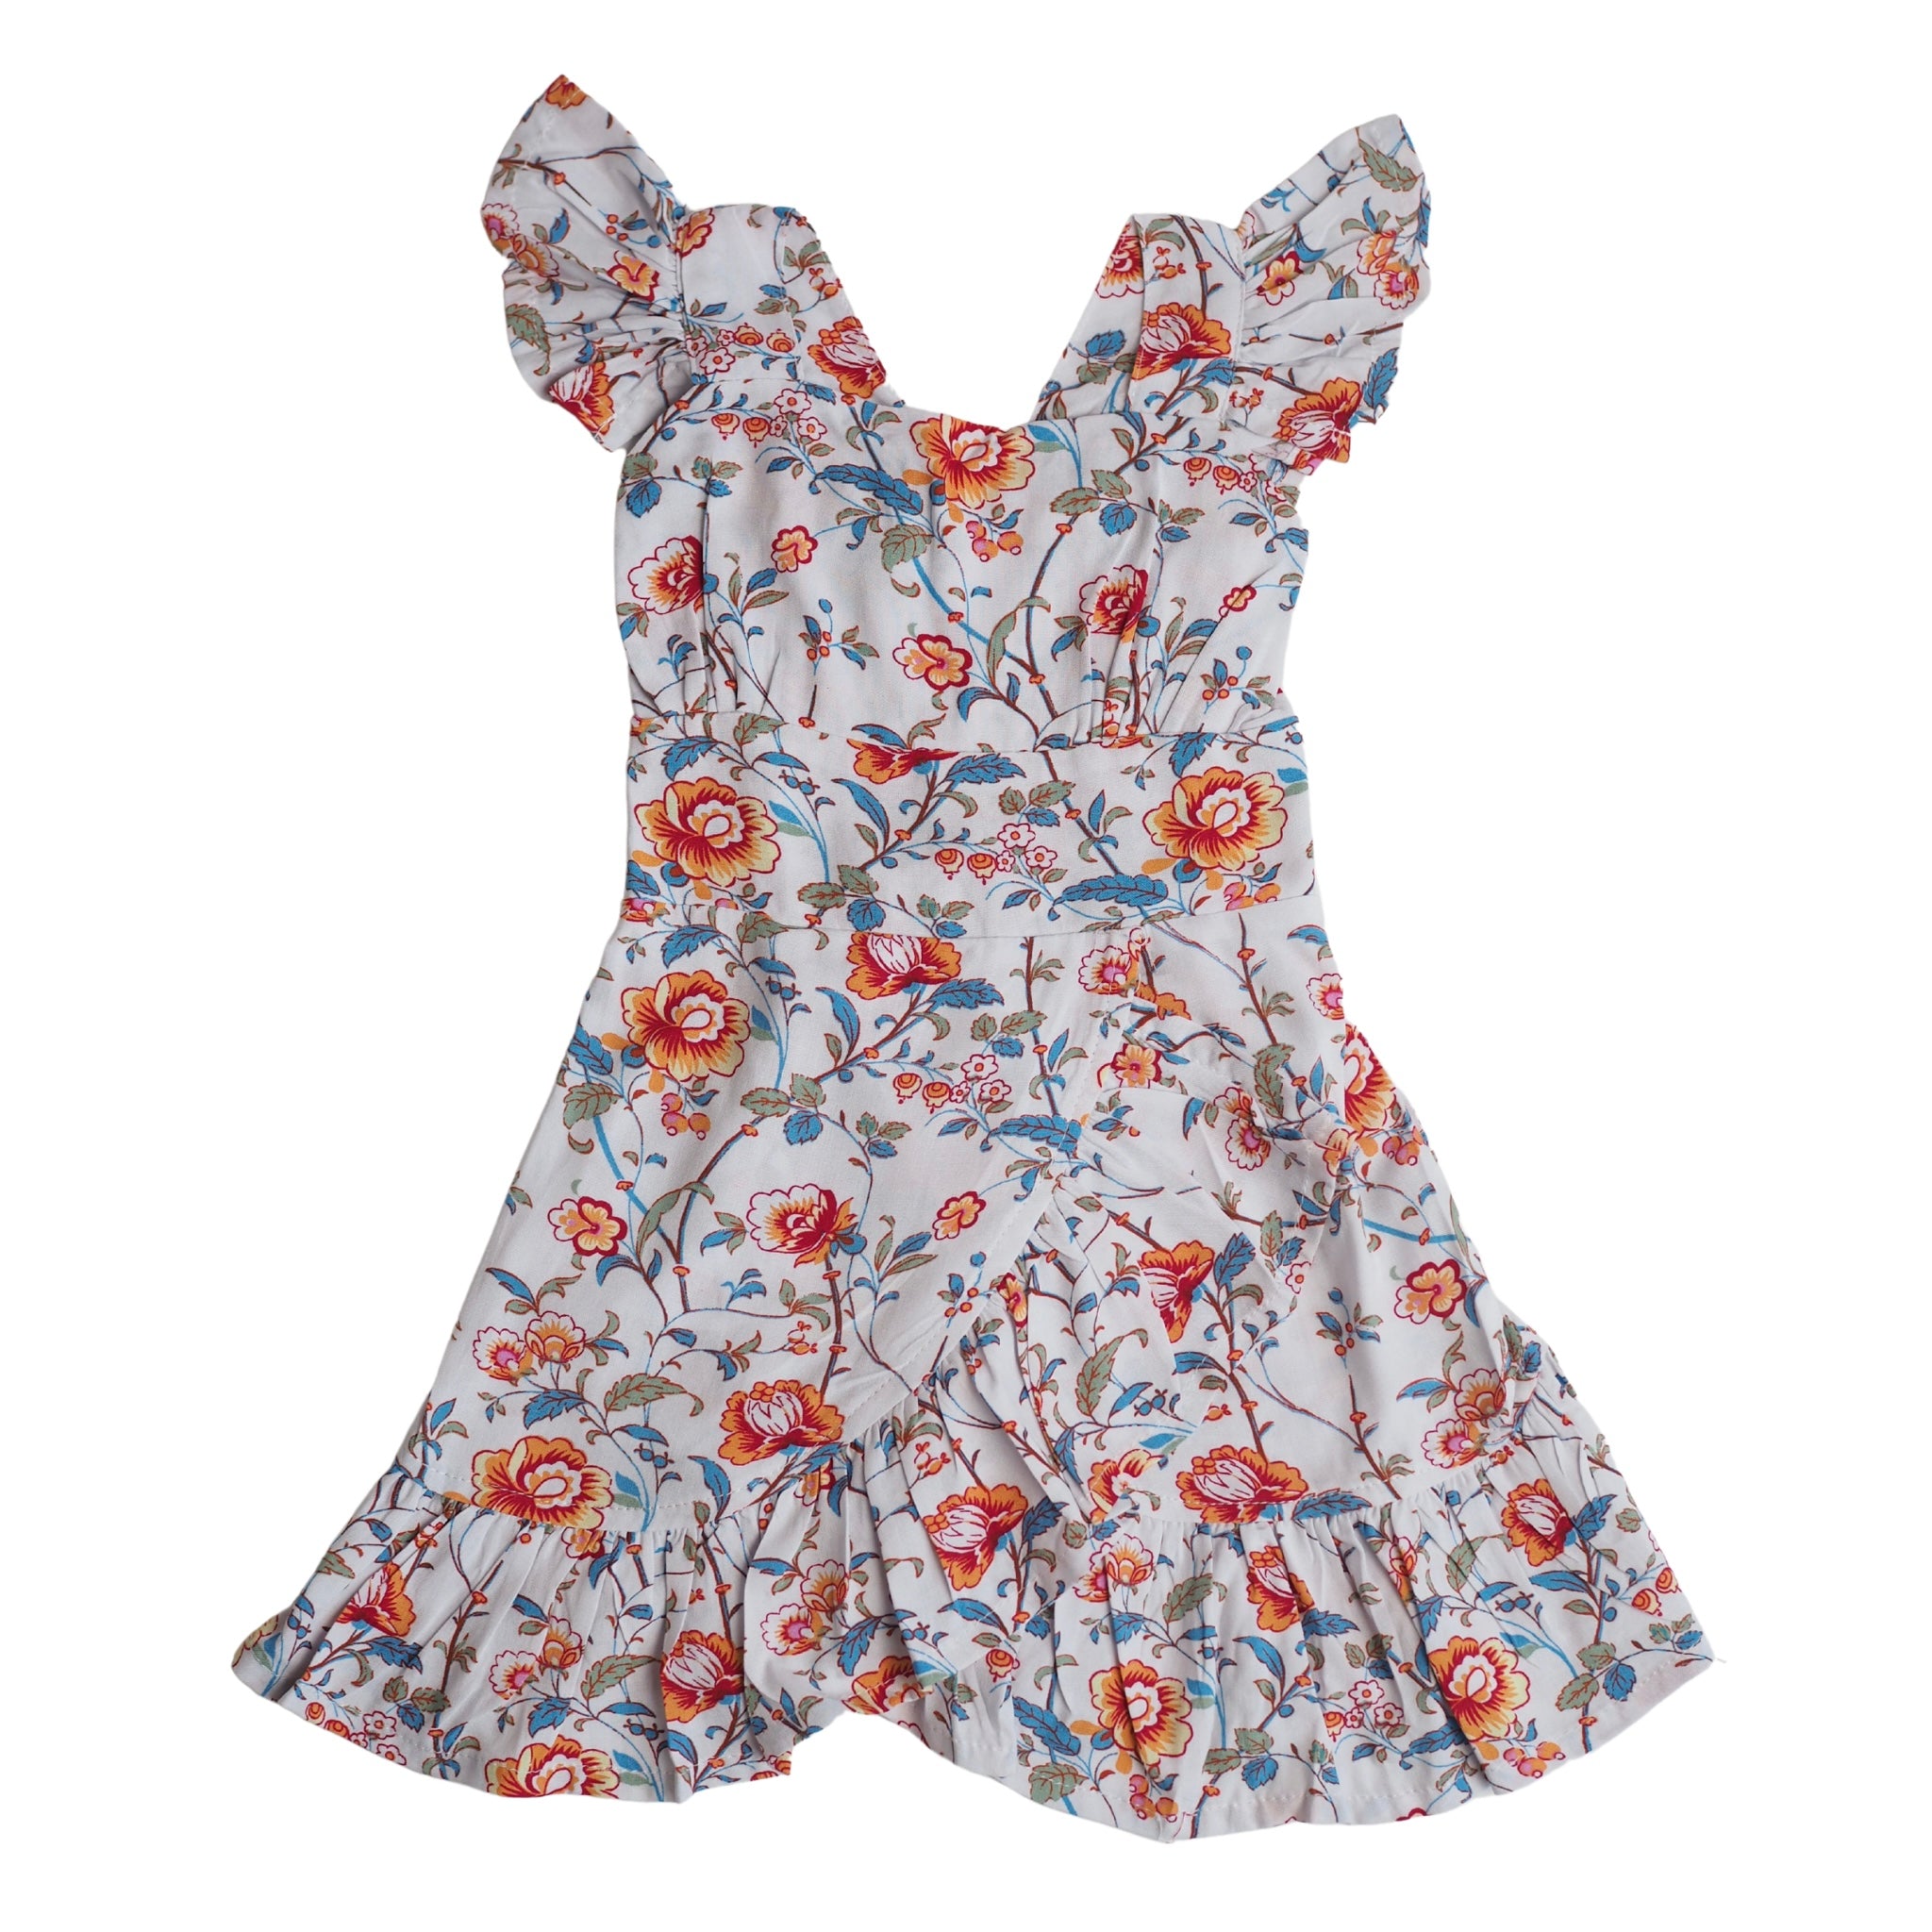 Bella Dress - White Floral – The Rojak Baby